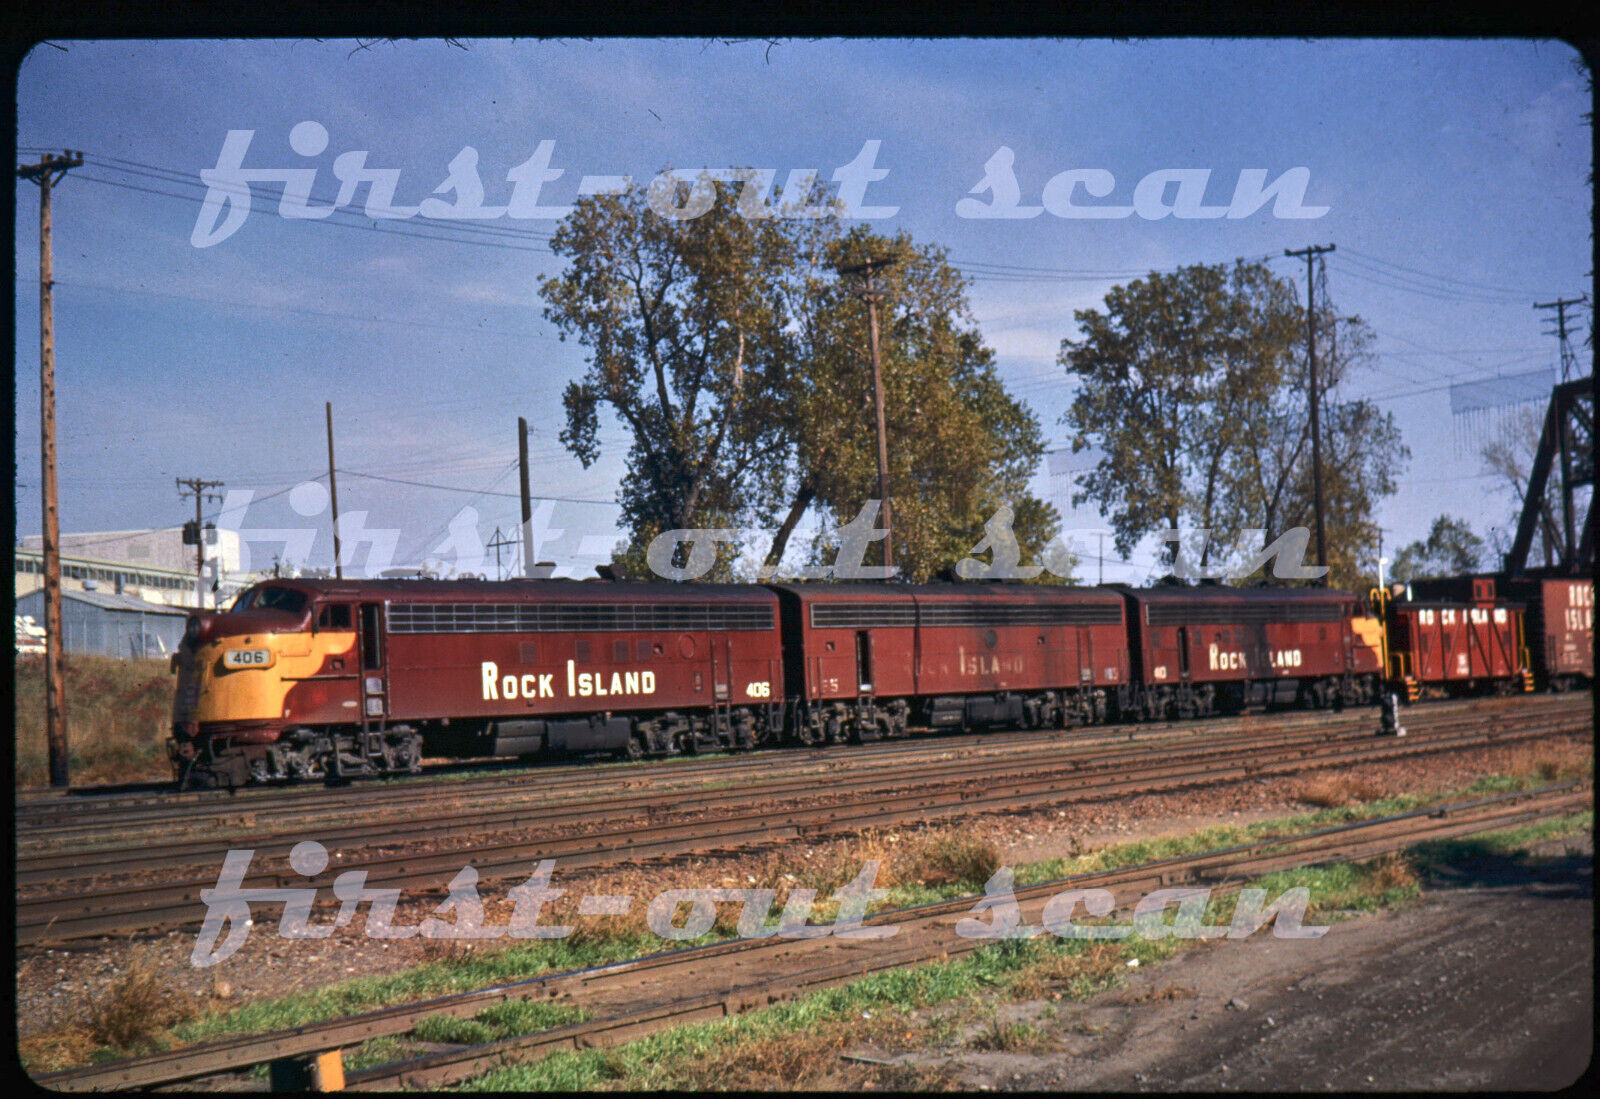 R DUPLICATE SLIDE - Rock Island RI 406 FP-7 Action on Freight